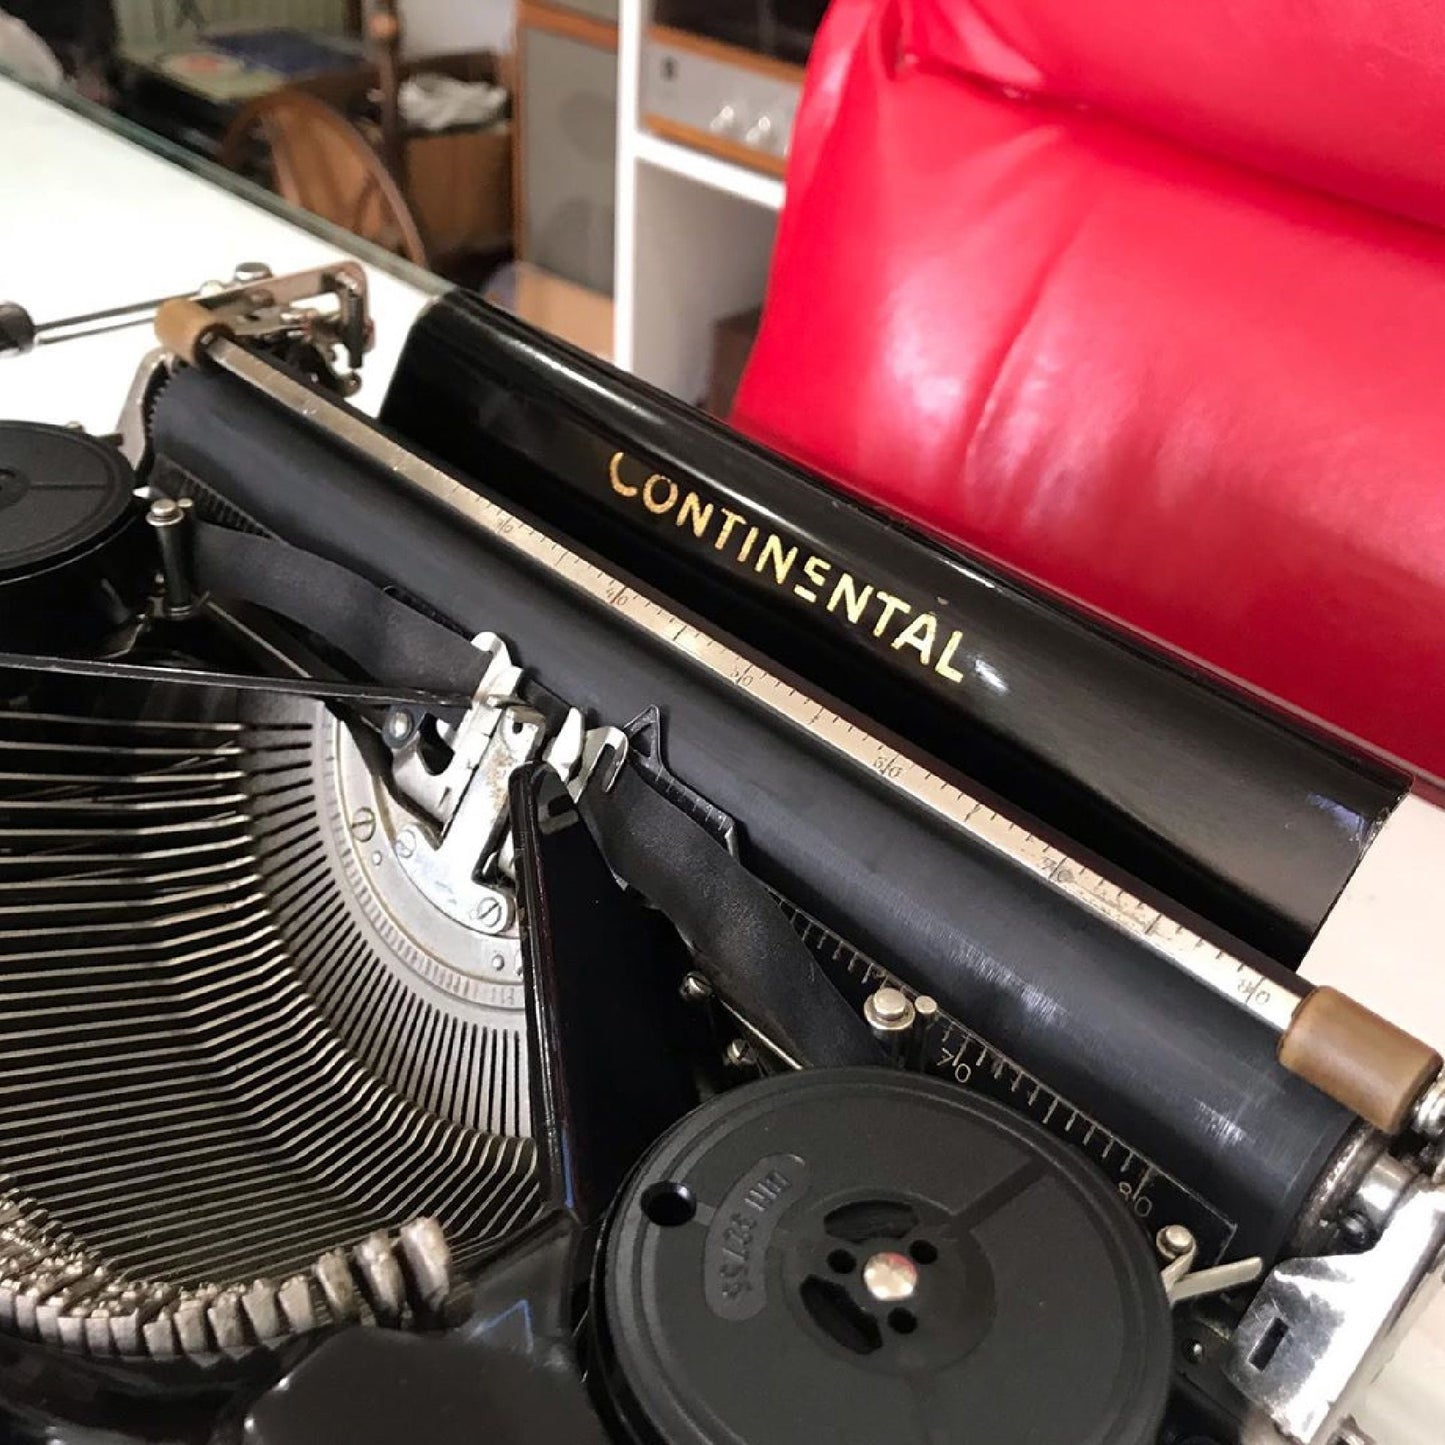 Continental Typewriter | Vintage Glass Keyboard, Fully Operational | 1940 Model Black Elegance for an Inspired Writing Experience